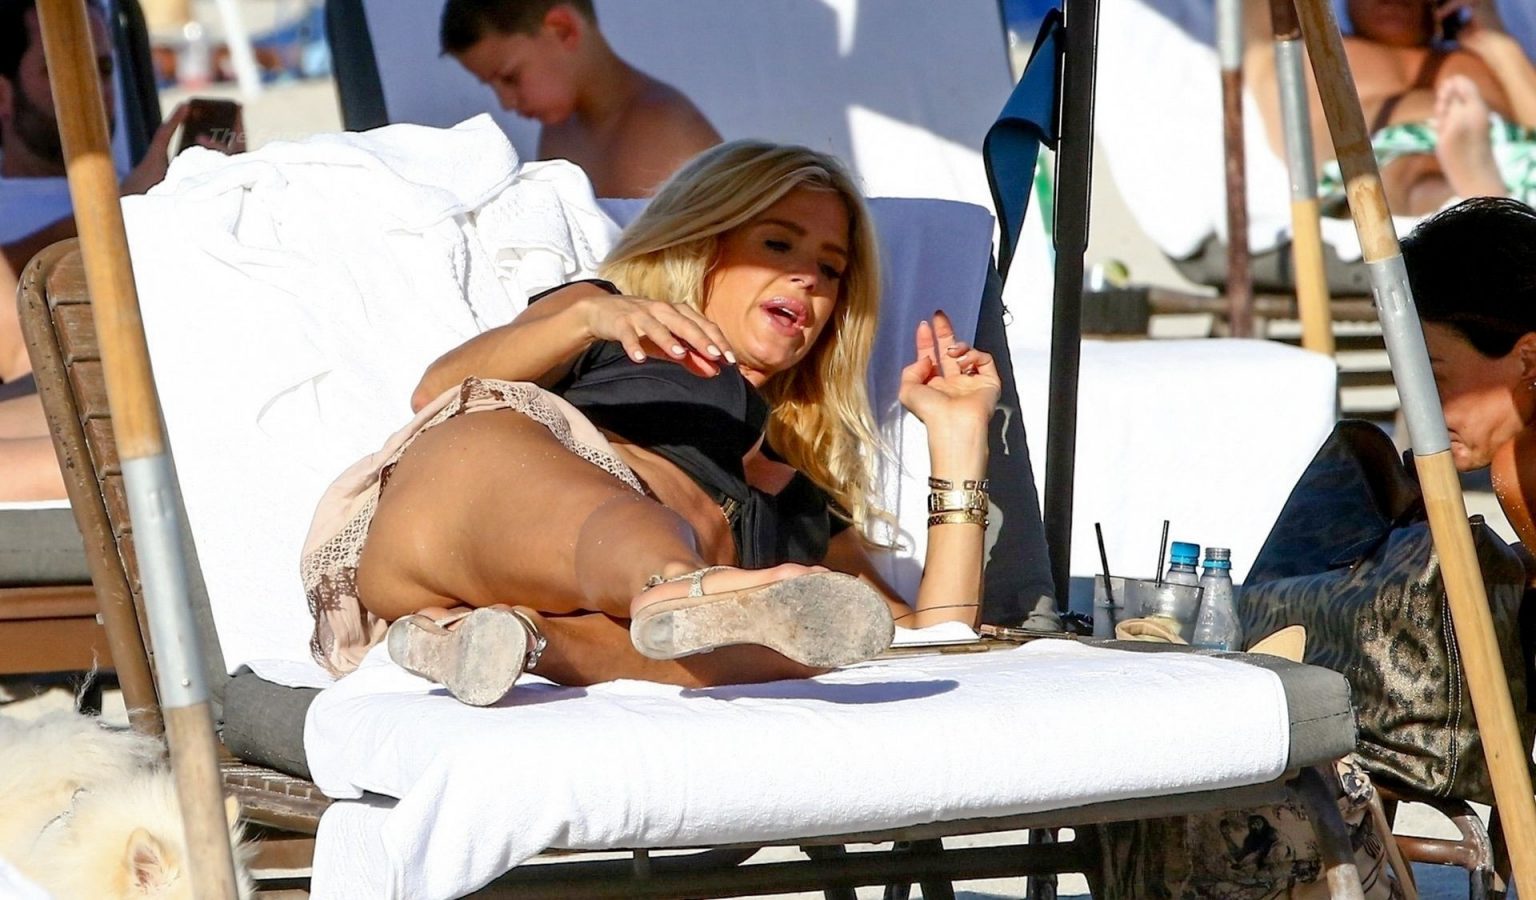 Victoria Silvstedt Bares Her Assets While Kicking Back With Friends In